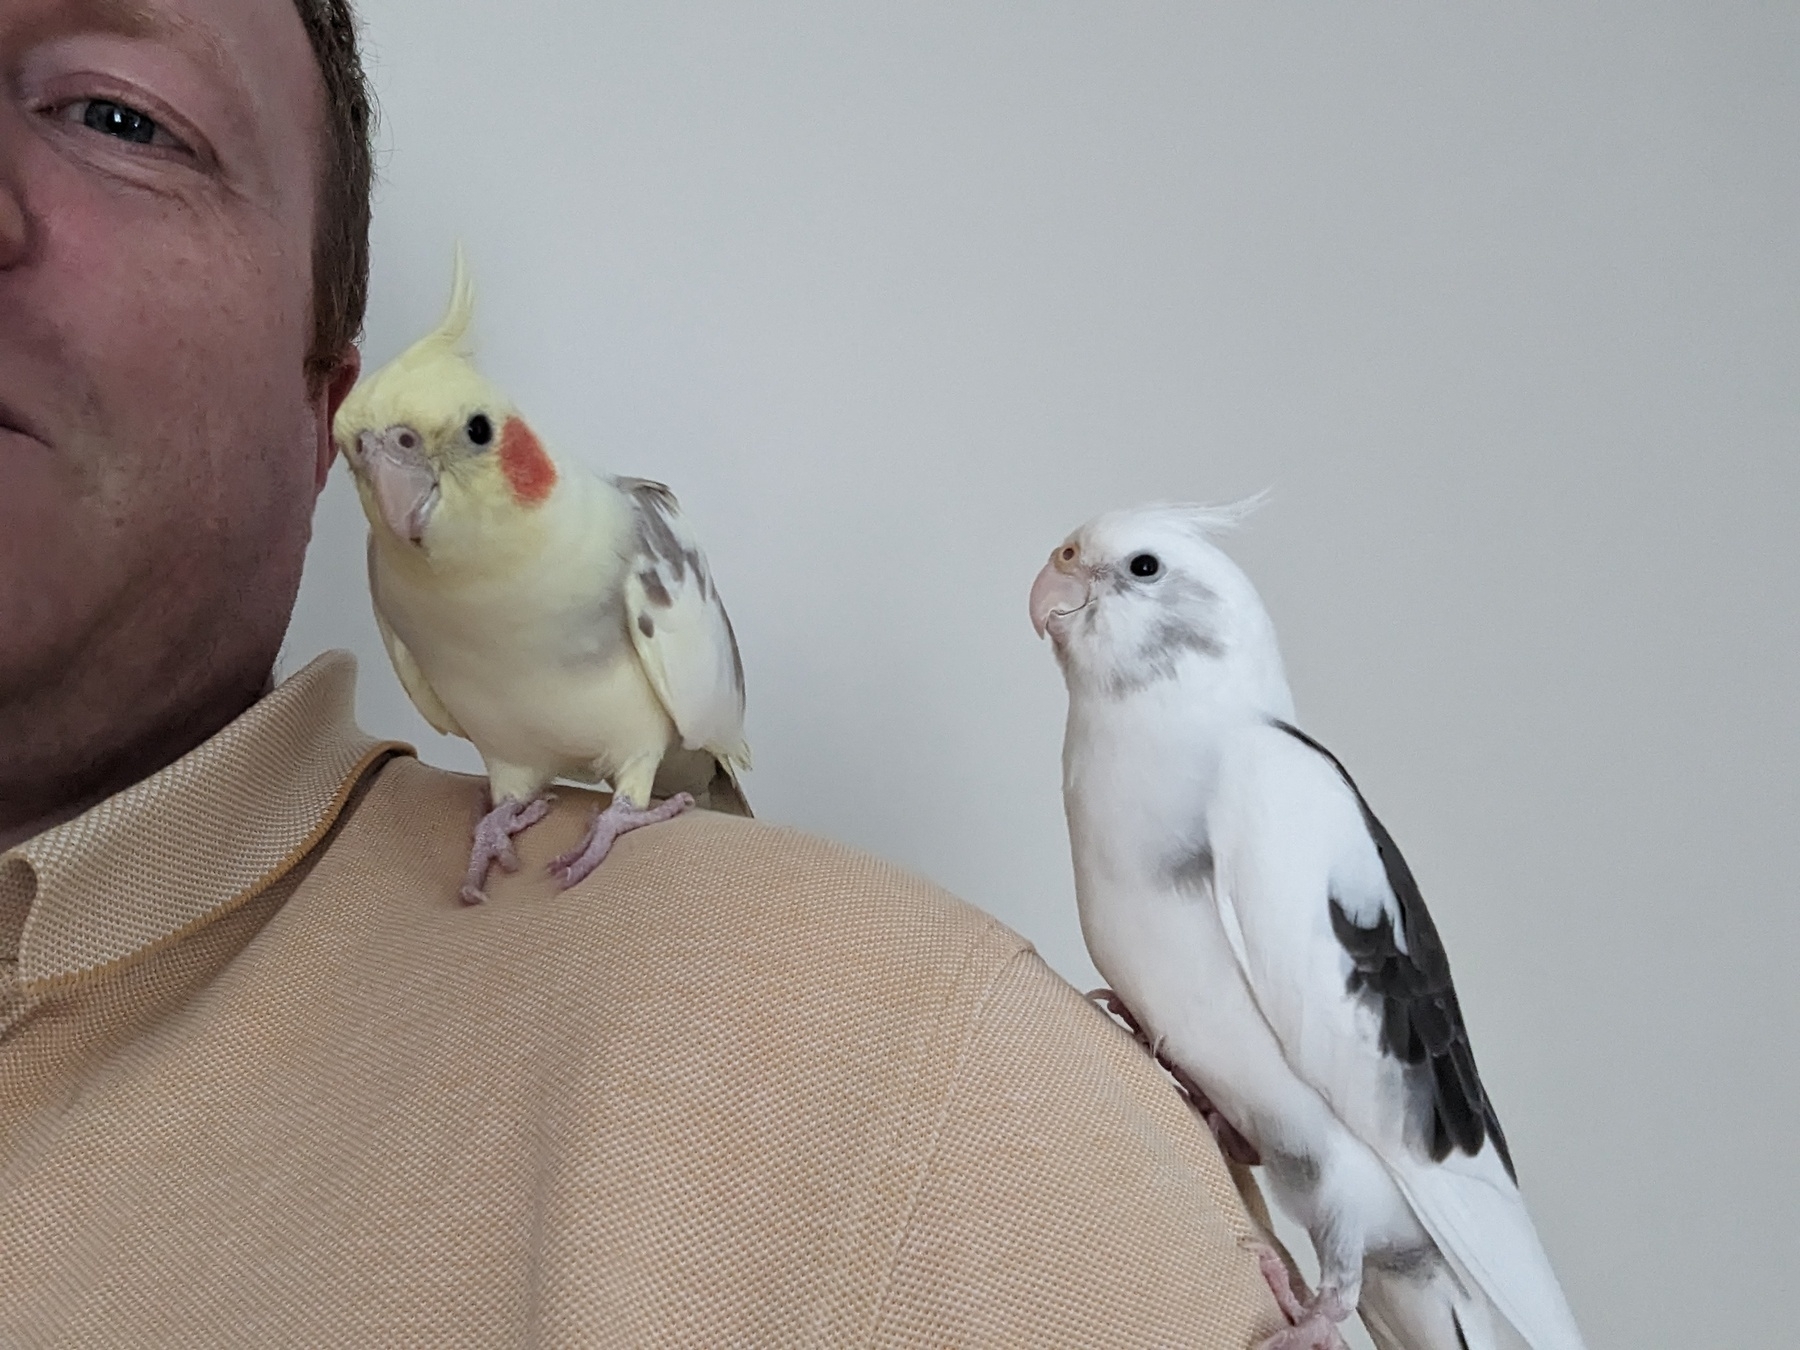 Two cockatiels perched on a shoulder.